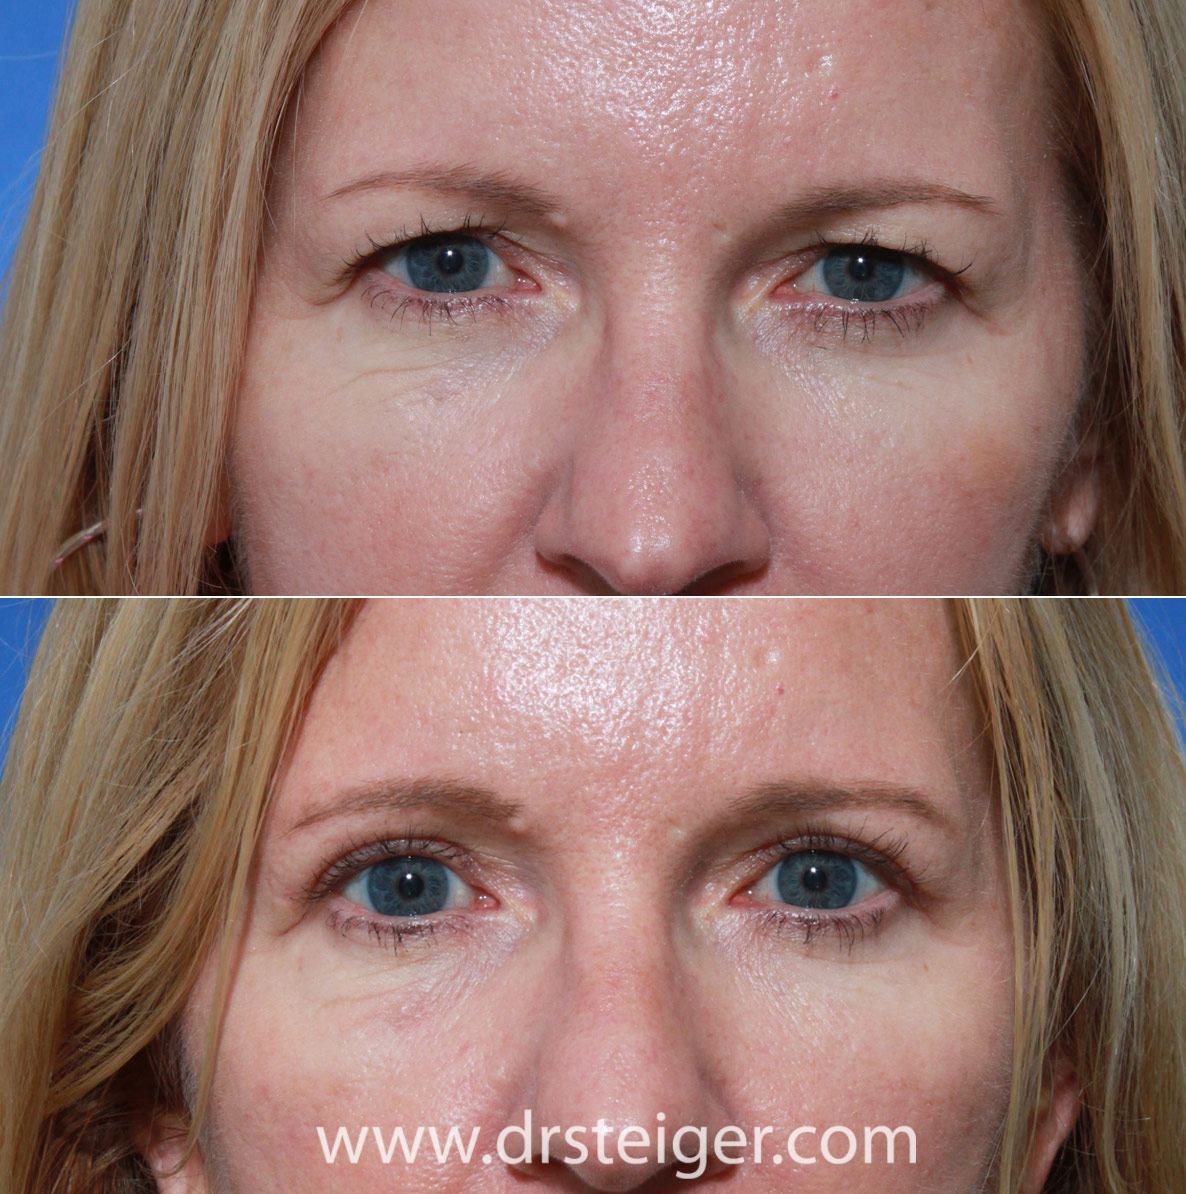 blepharoplasty before and after young